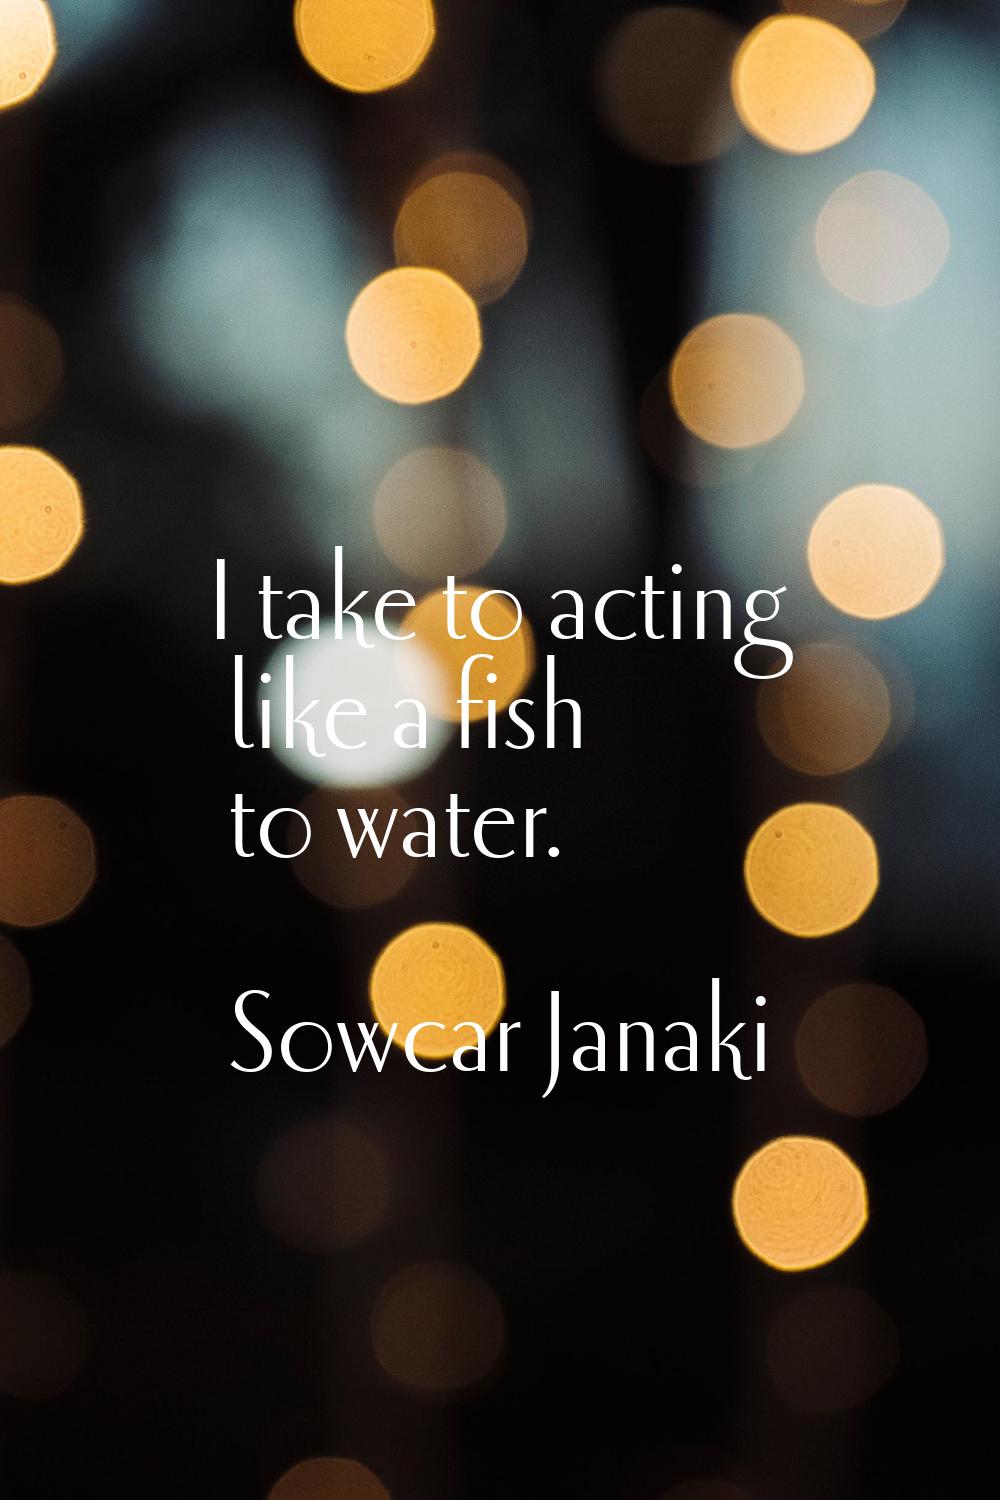 I take to acting like a fish to water.